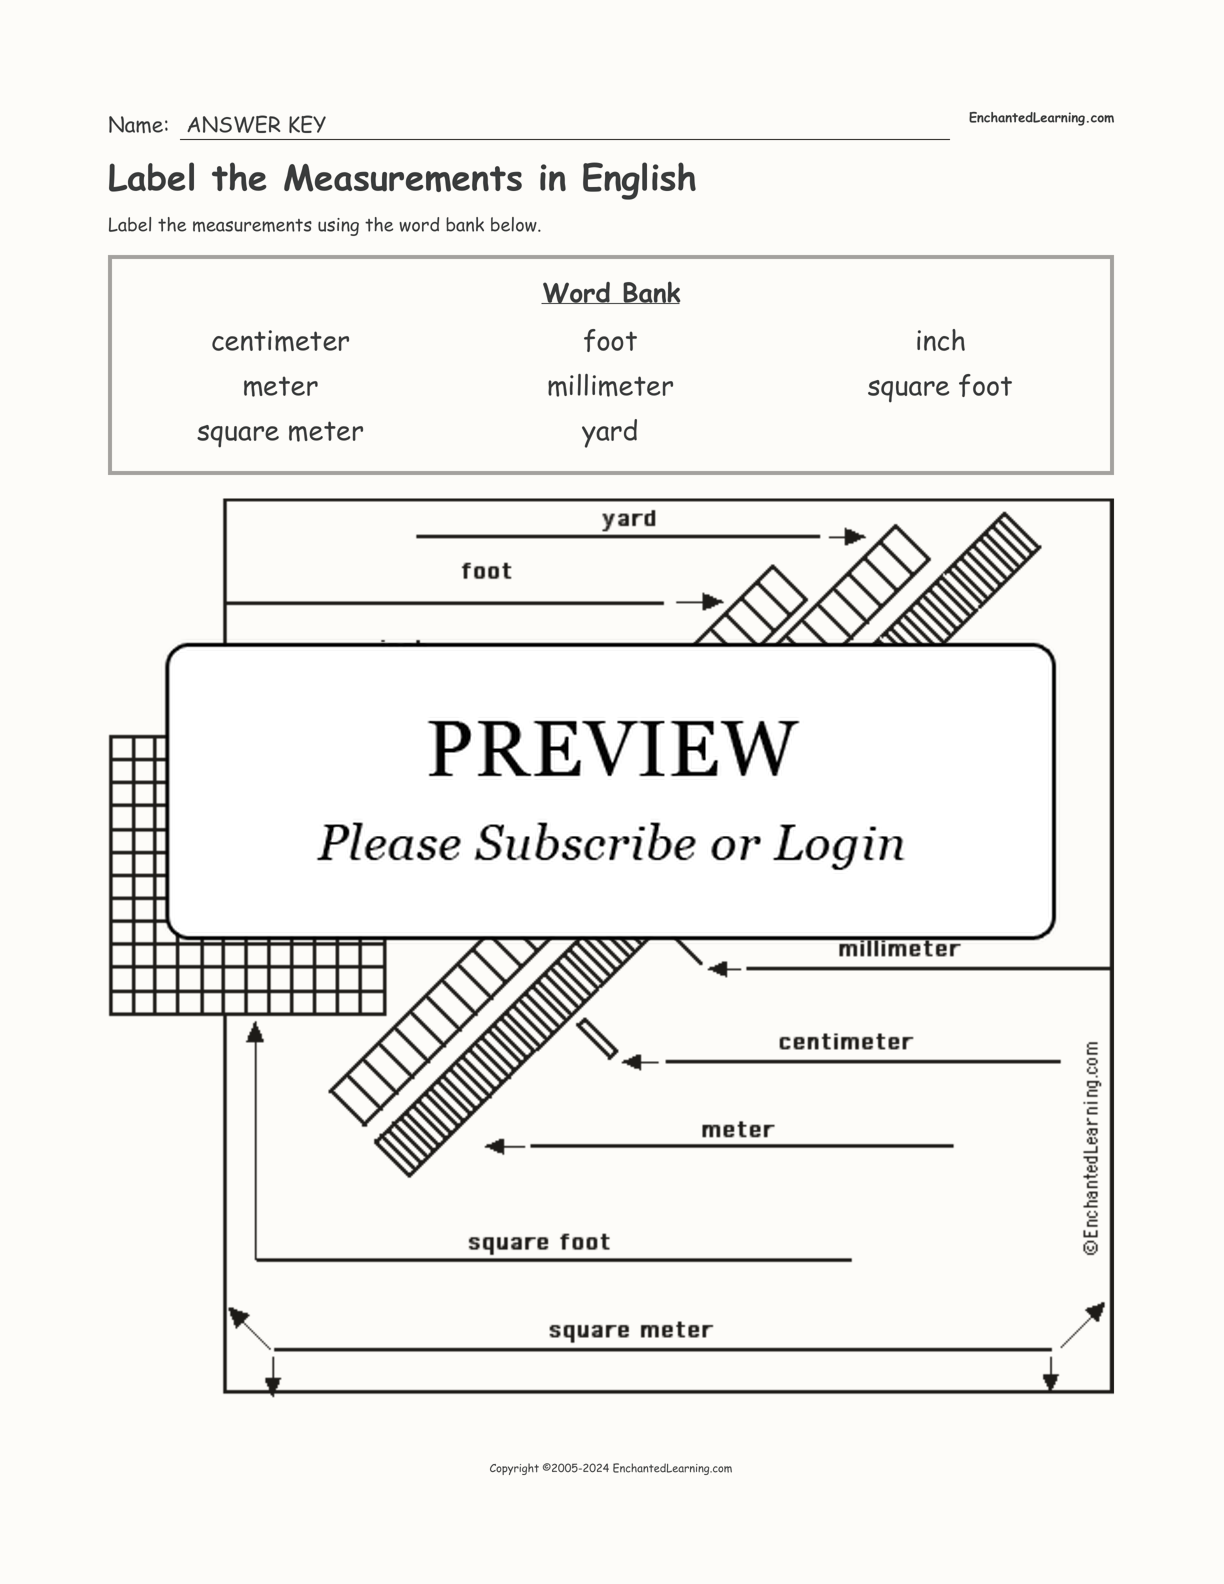 Label the Measurements in English interactive worksheet page 2